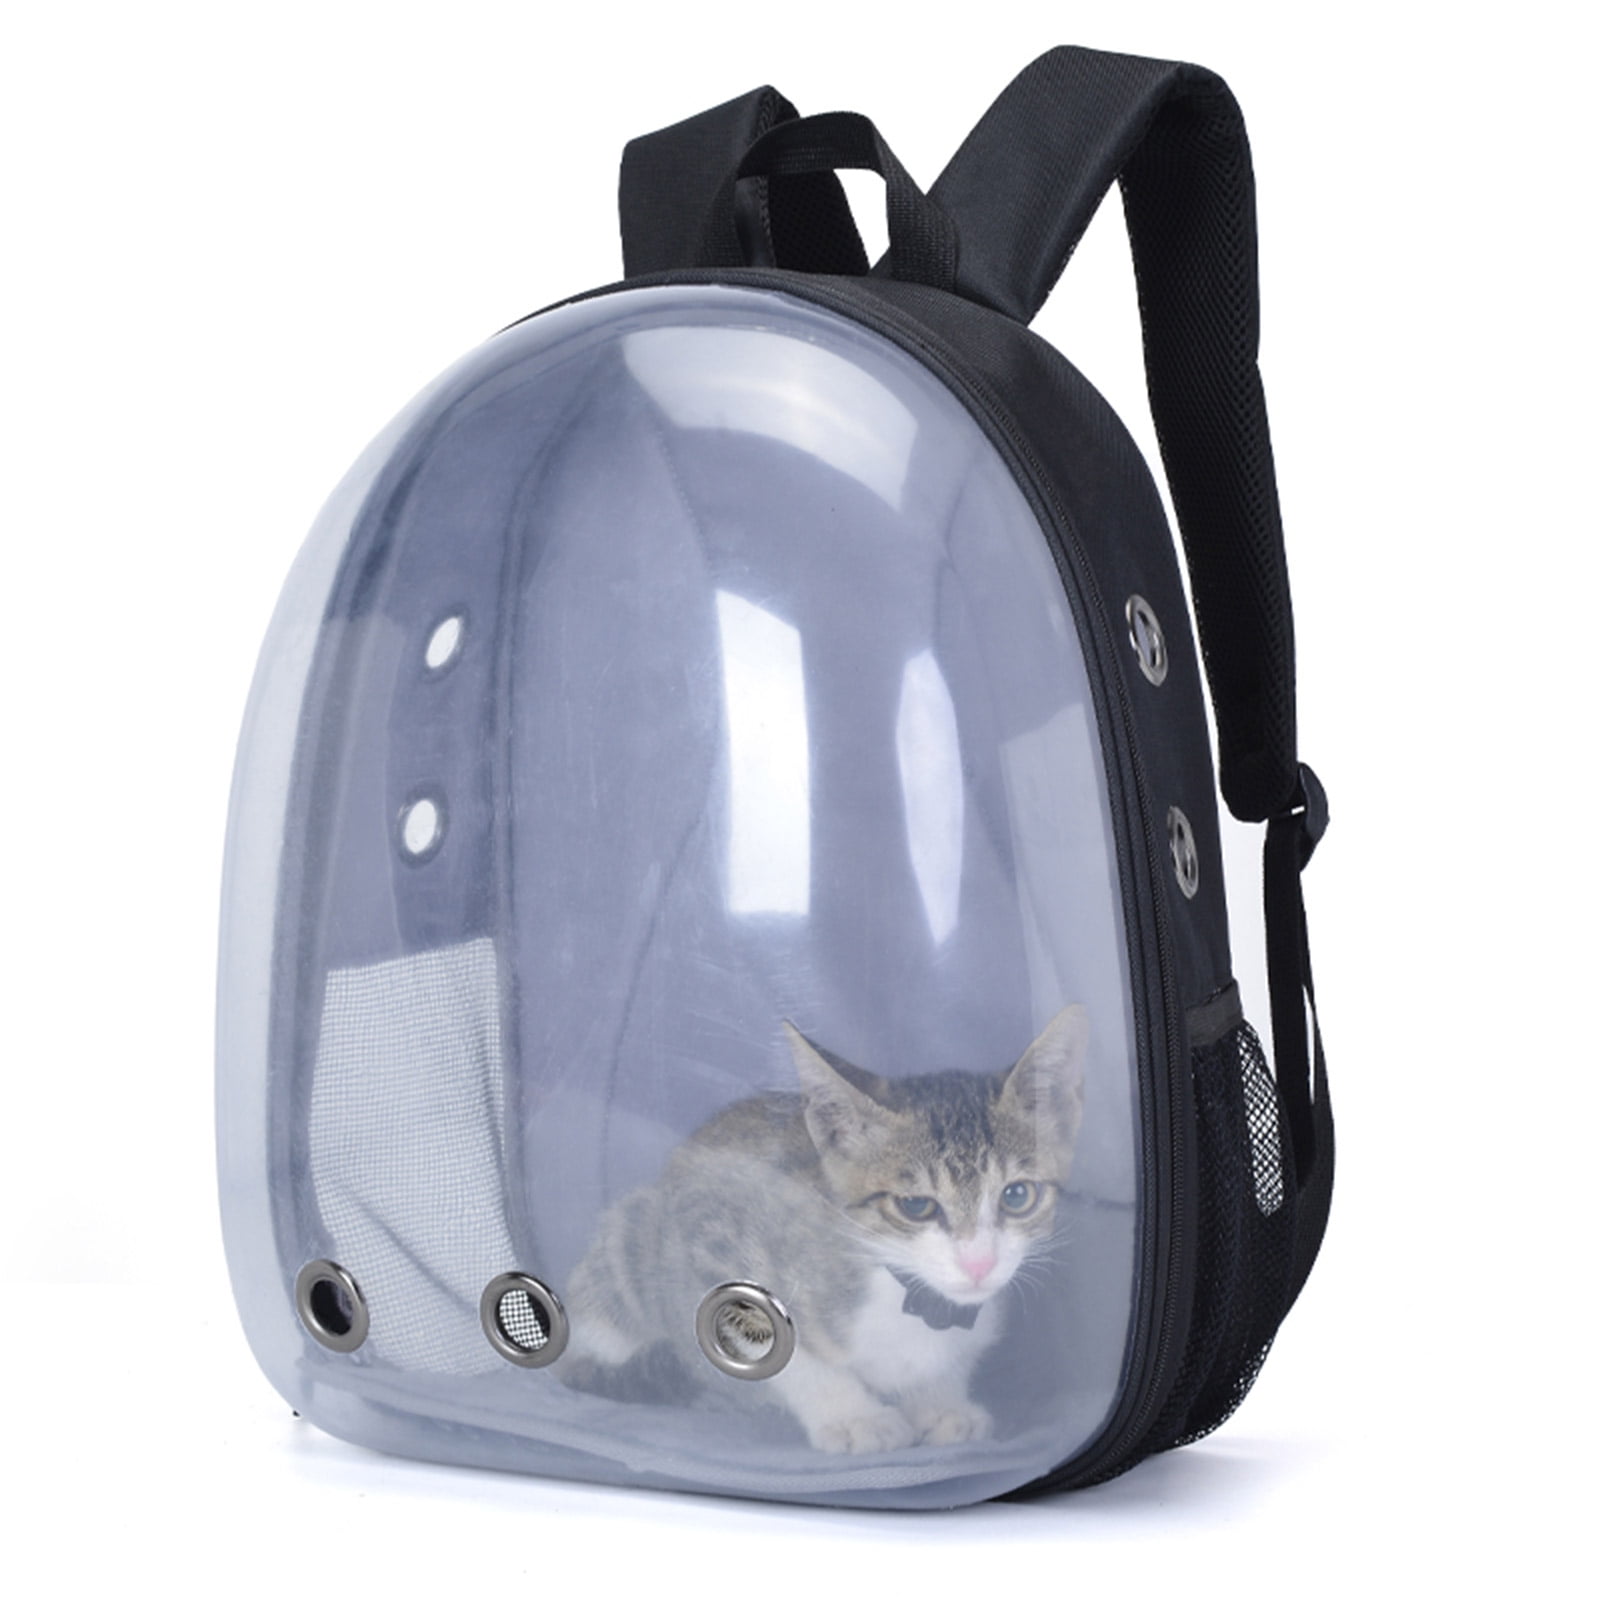 AOLVO Transparent Pet Carrier Backpack for Cat Kitten Doggie Puppy Portable Bubble Carrying Backpack Travel Knapsack Bag Waterproof Carrier Purse Baby Carrier for Small Medium Breed Pet Pink